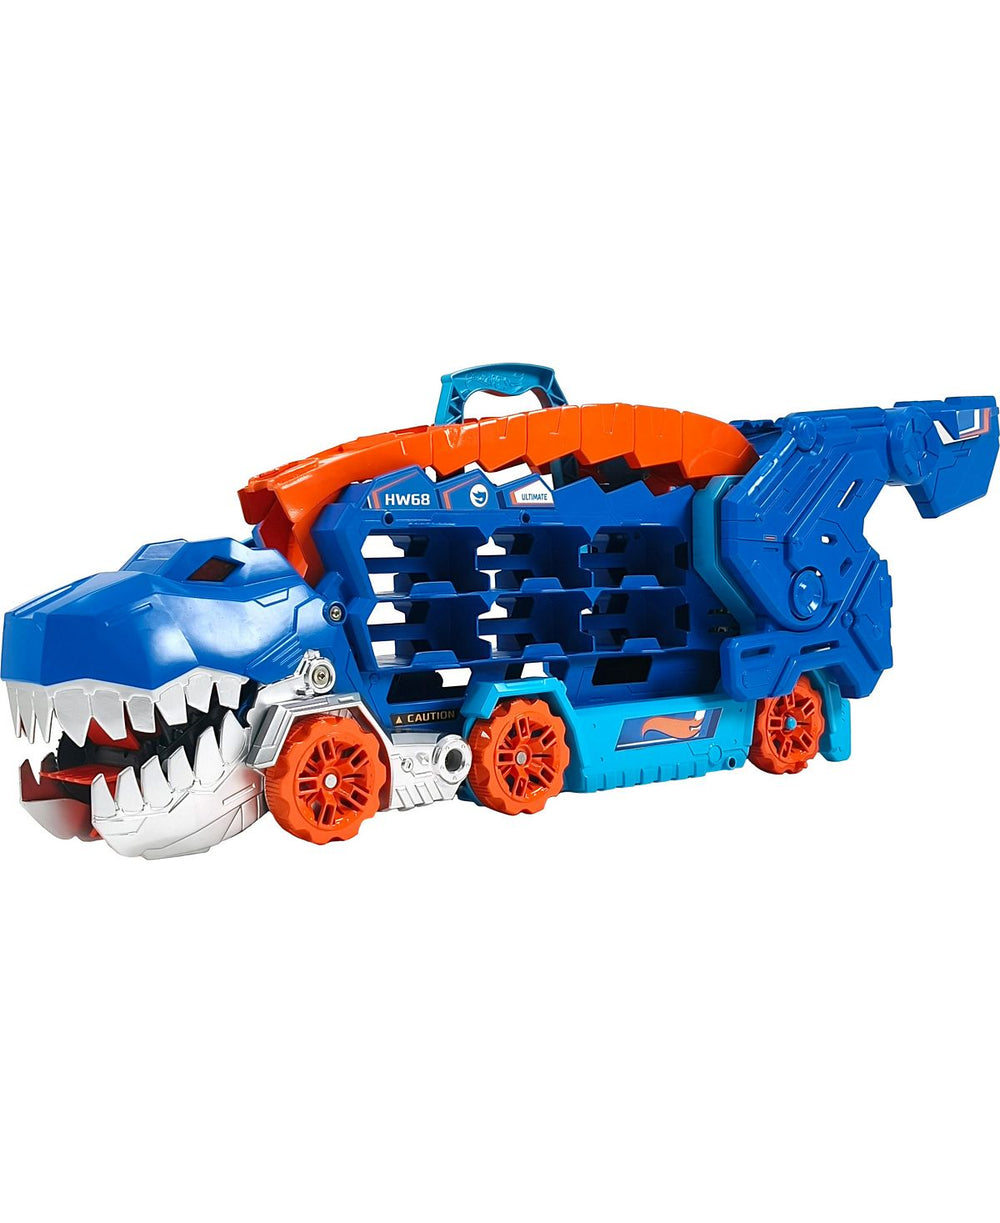 Hot Wheels City Ultimate Hauler - Transforming T-Rex with Dual Race Track, Stores Over 20 Cars